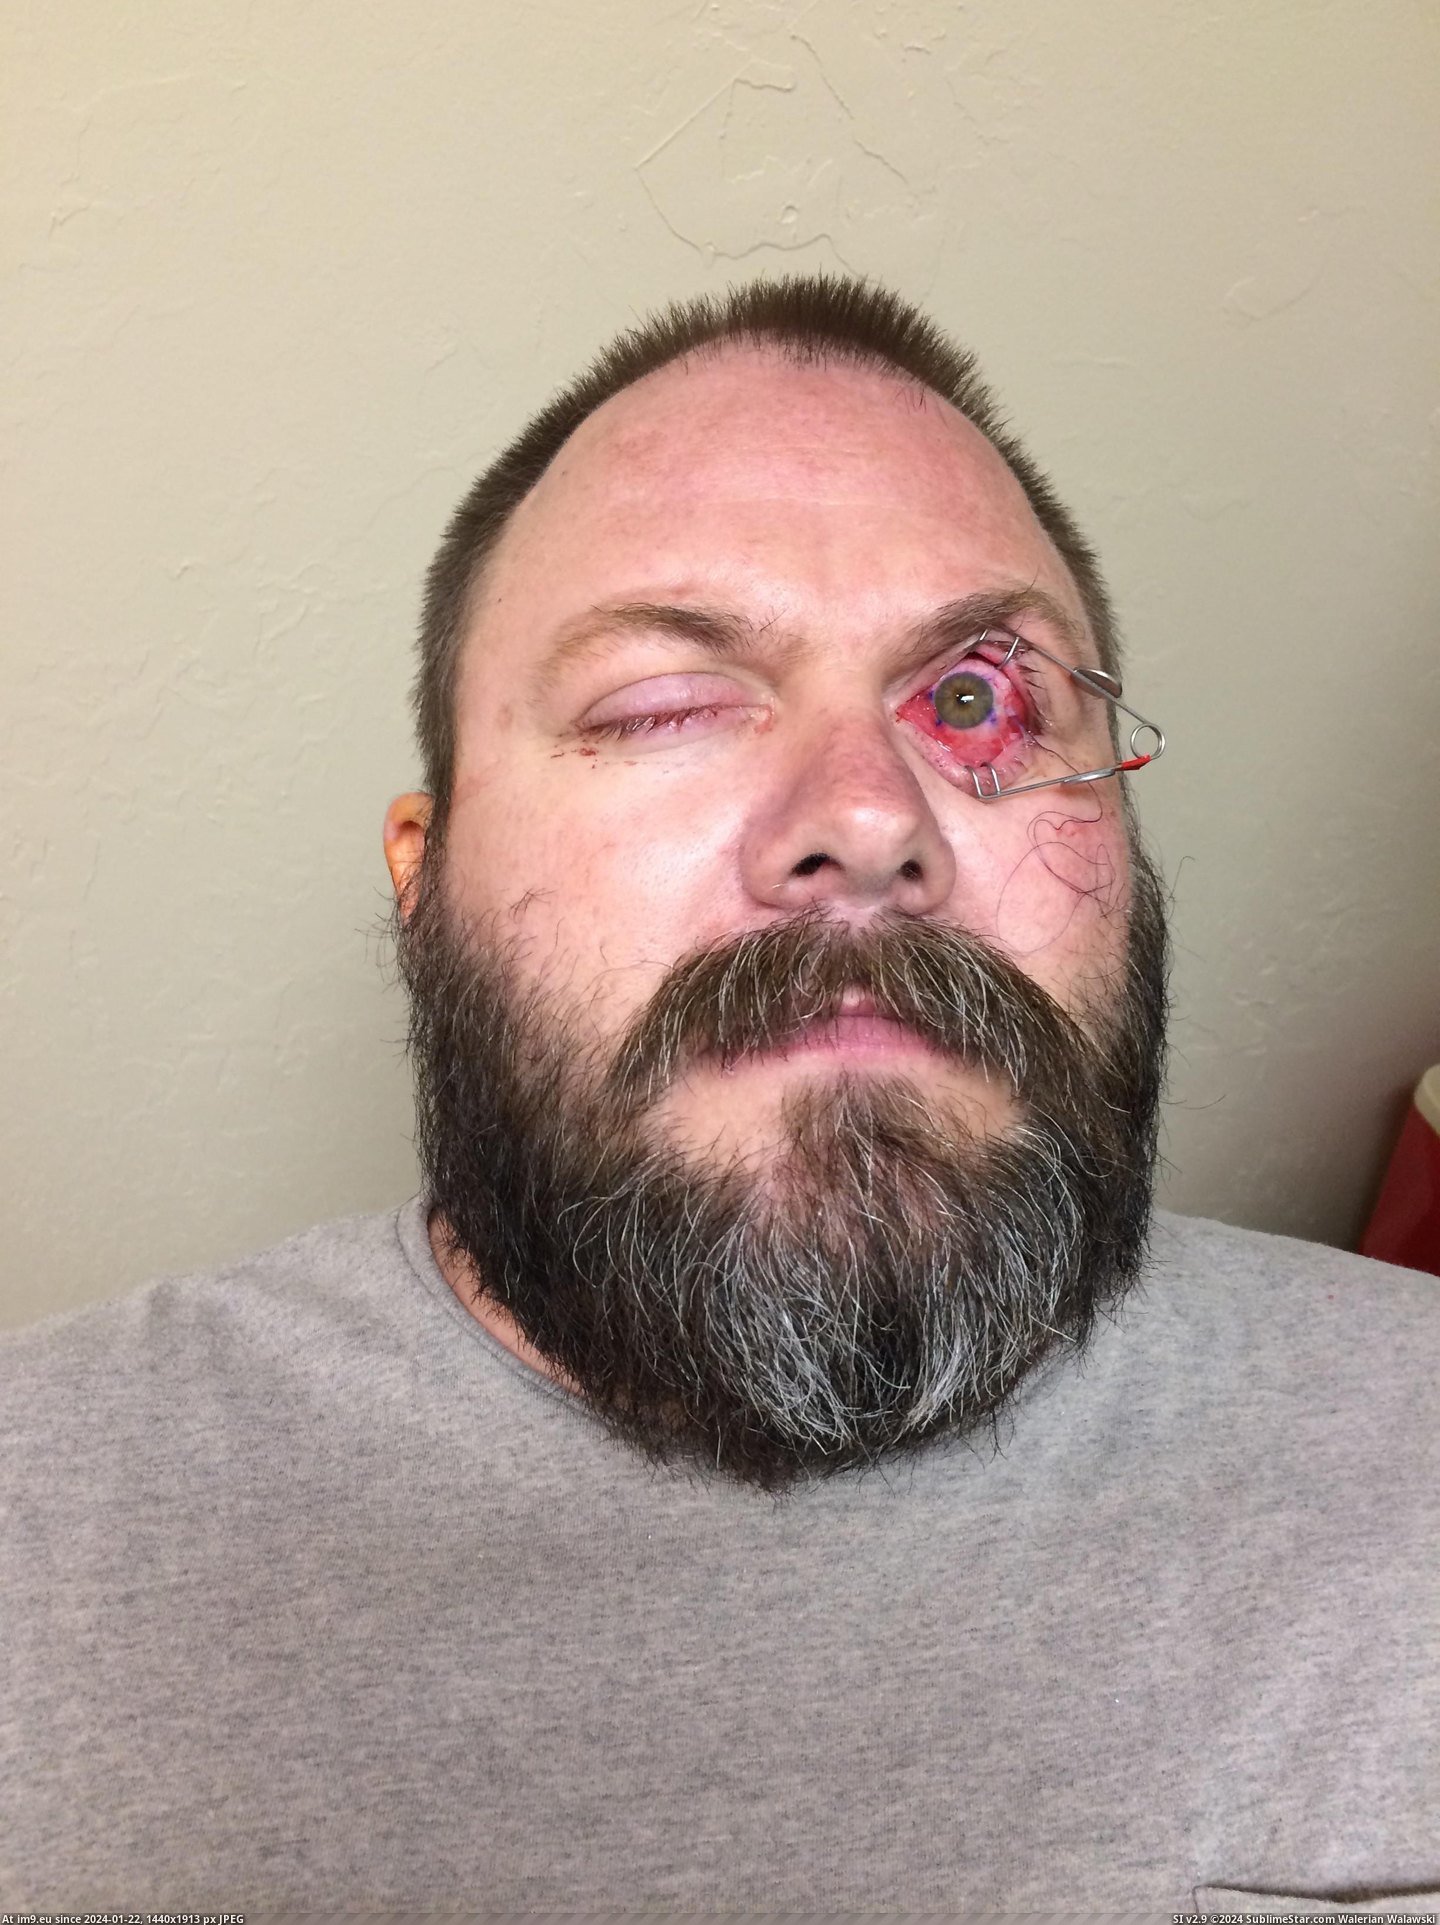 #Wtf #Surgery #Eye [Wtf] Had Eye Surgery Yesterday. 11 Pic. (Image of album My r/WTF favs))